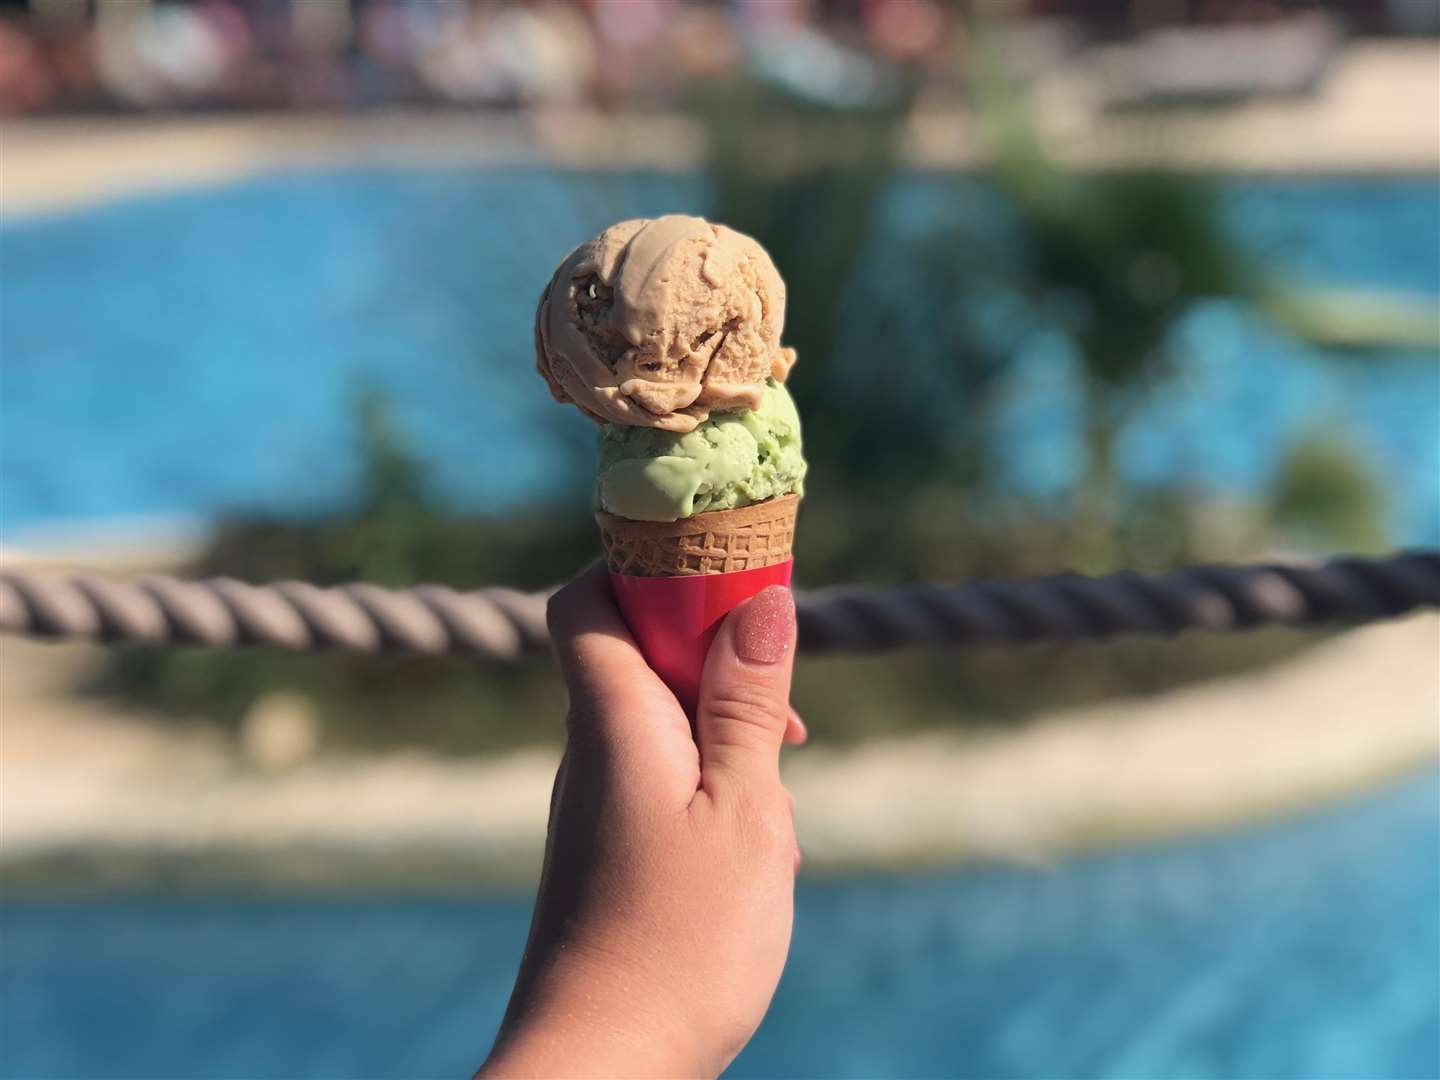 Scoop ice cream by the pool was a highlight (7102834)